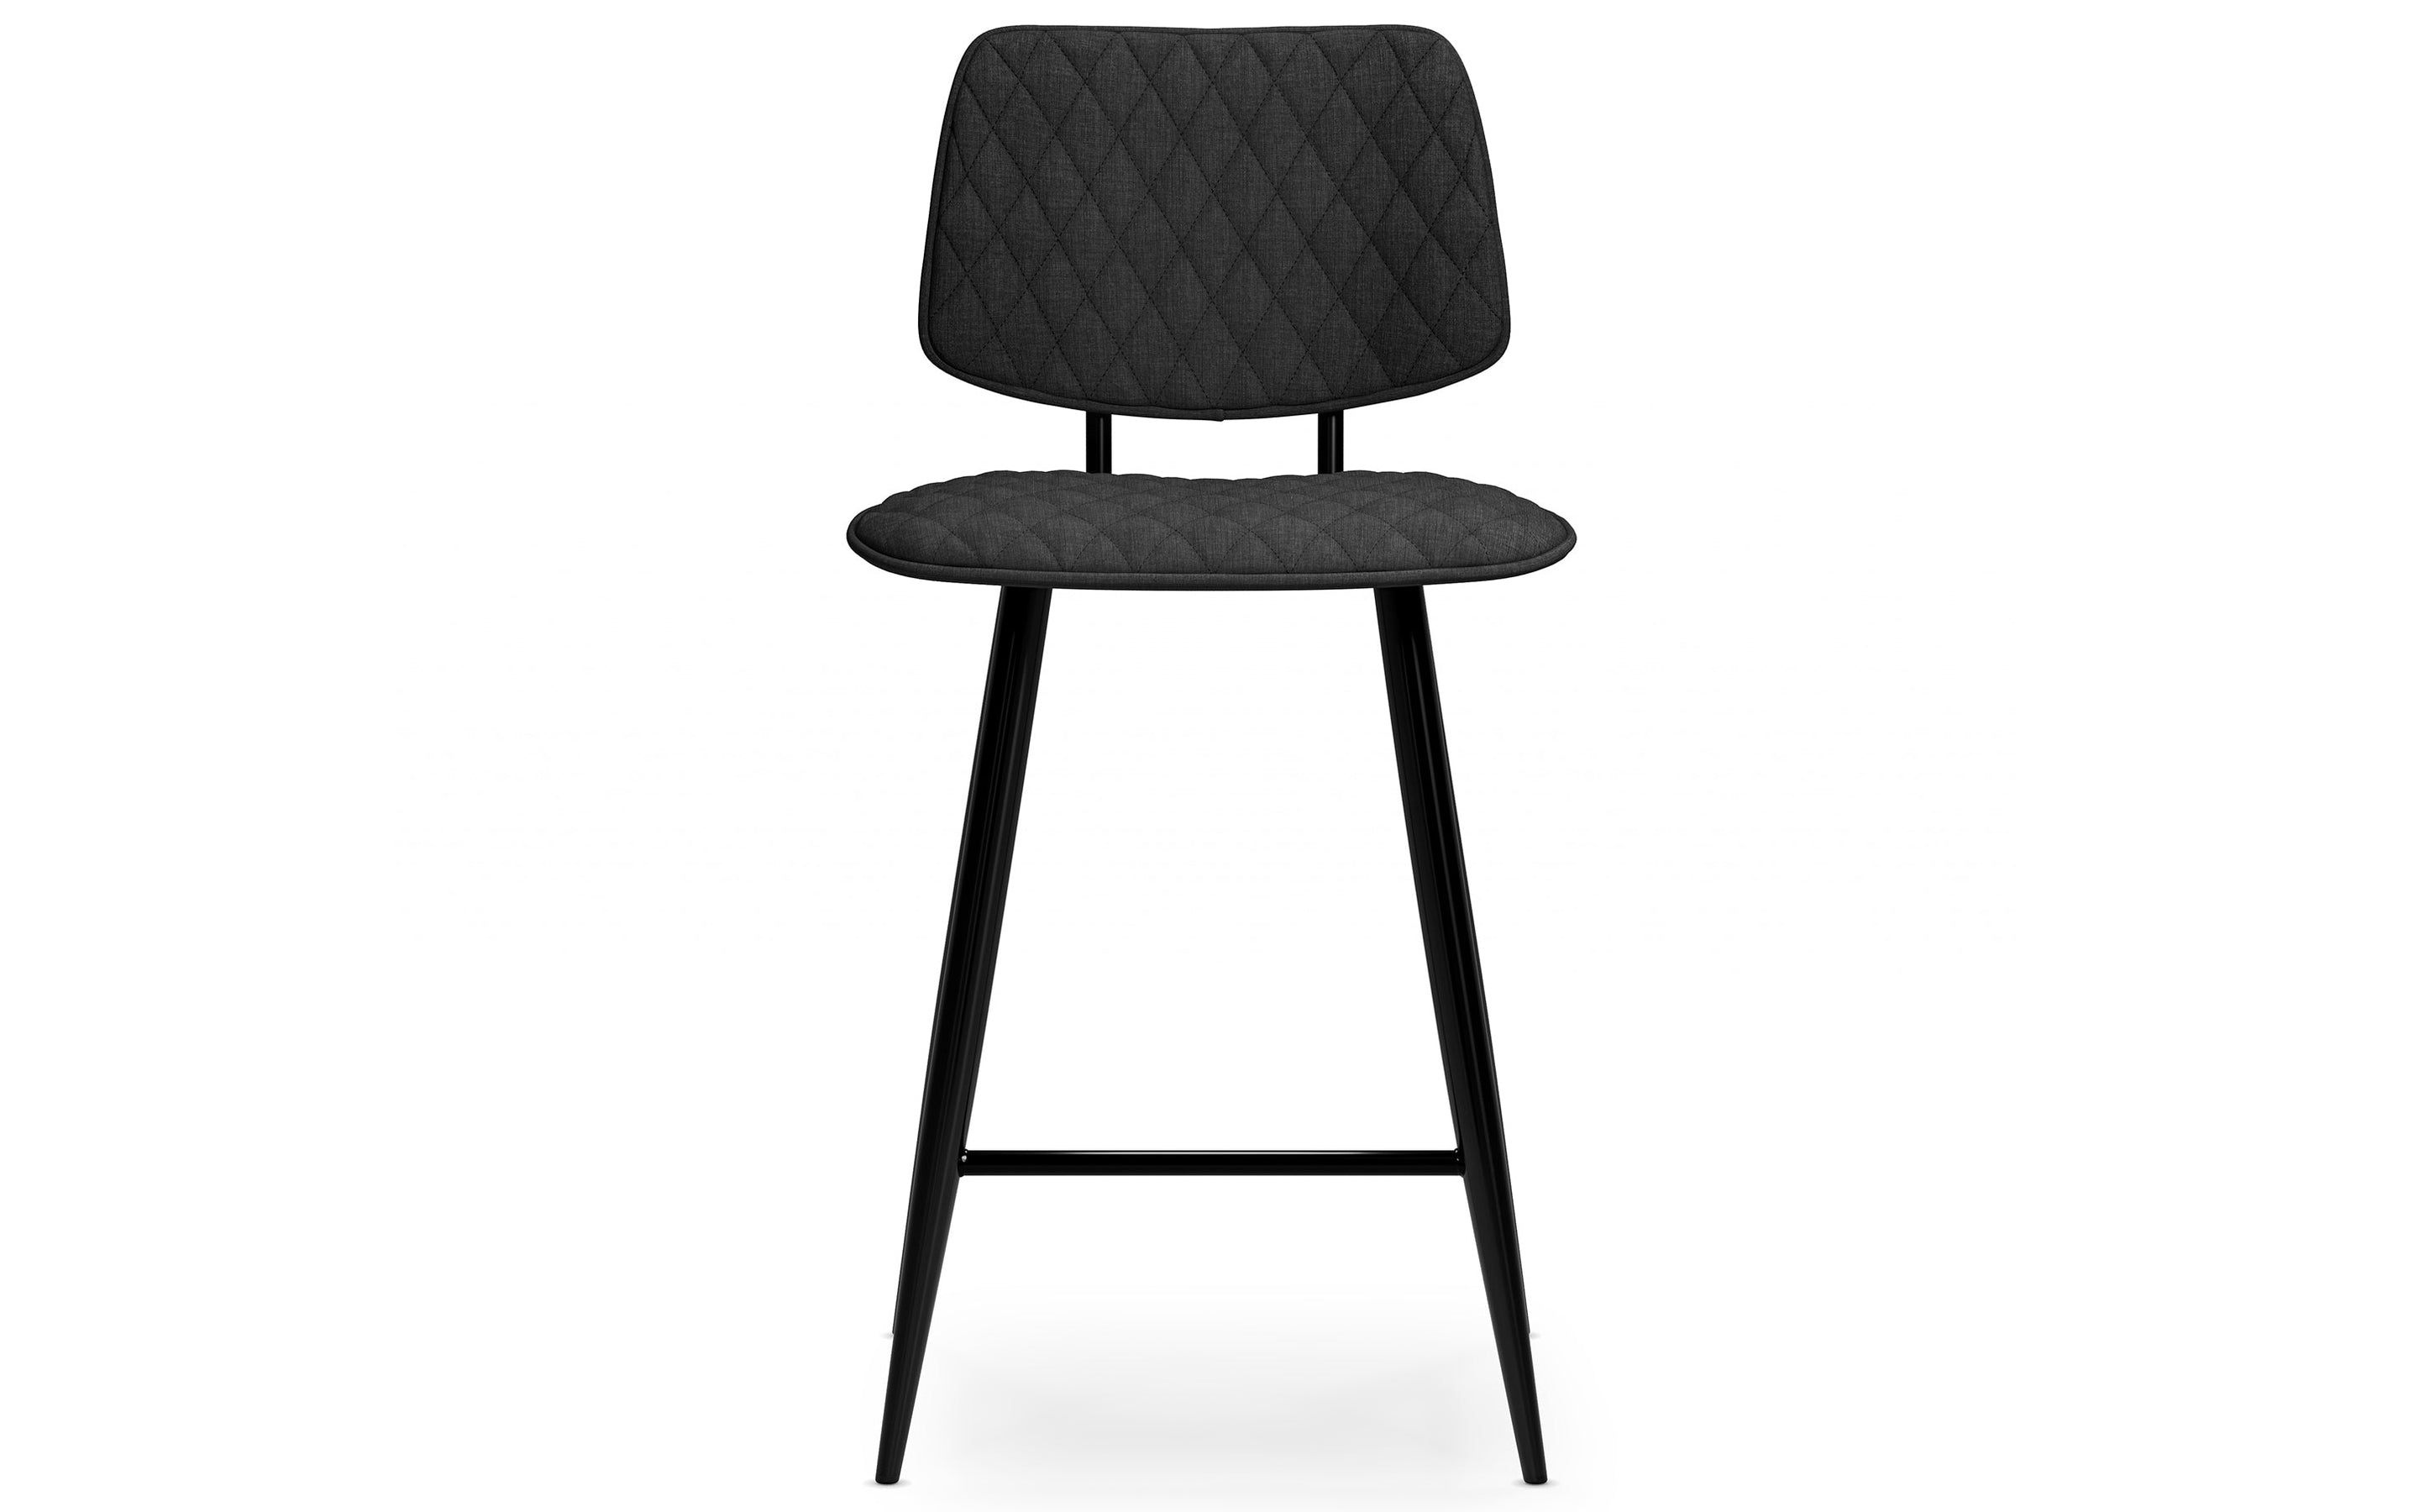 Charcoal Linen Style Fabric | Raya Counter Height Stool (Set of 2